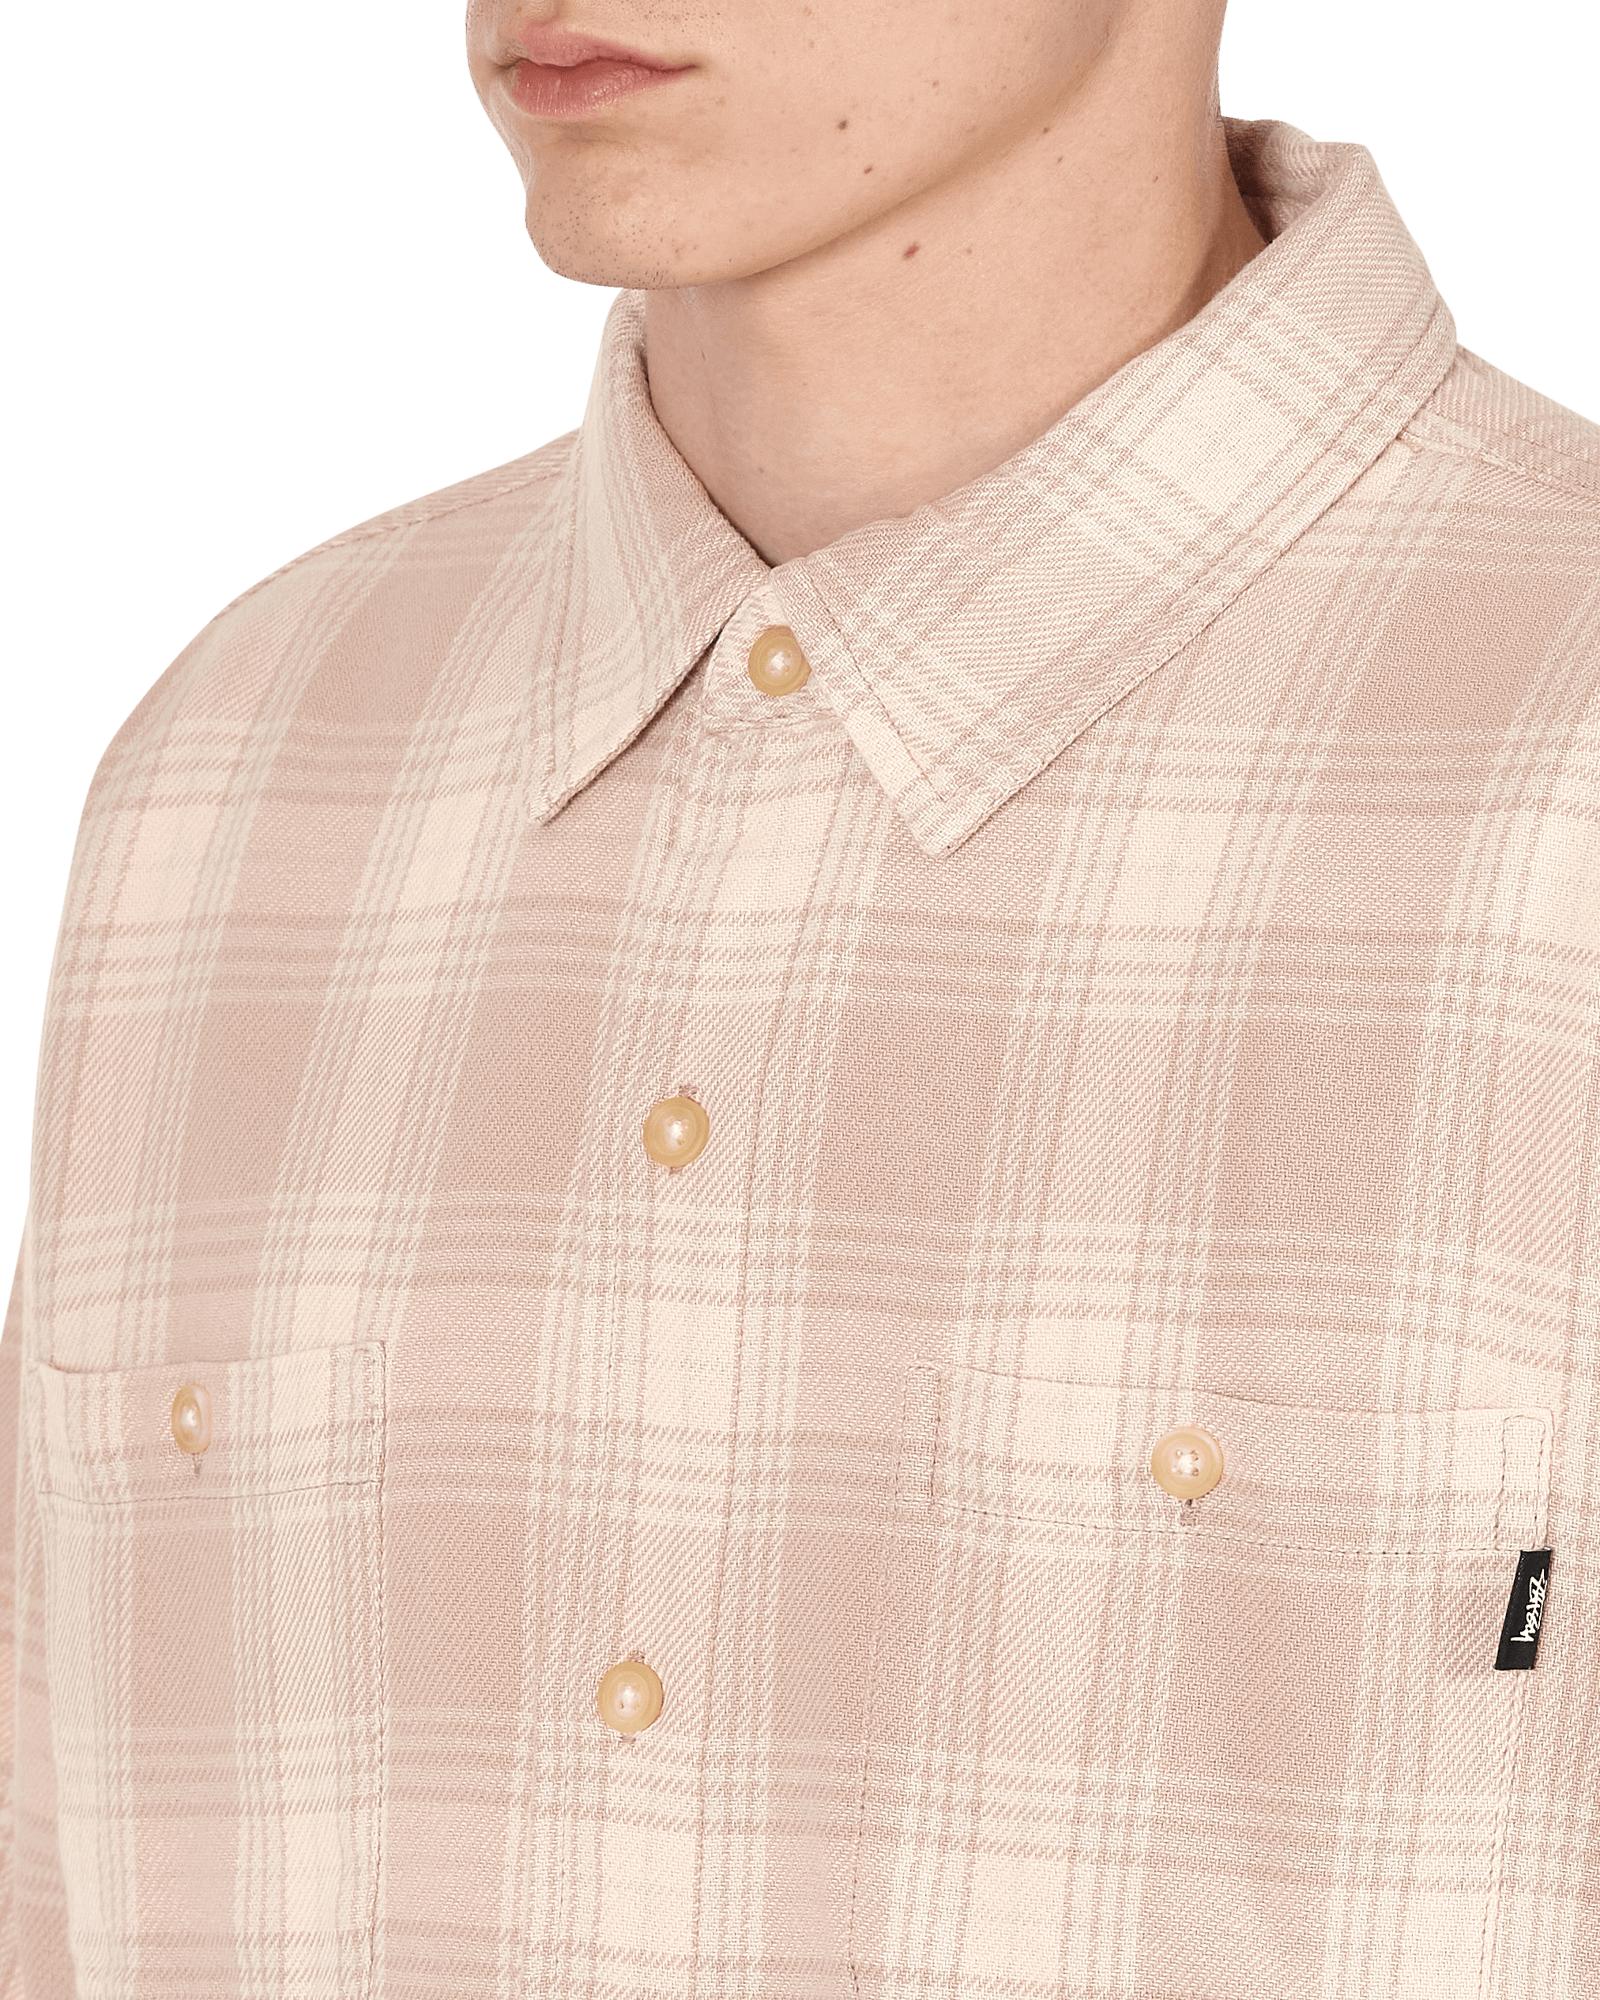 Stussy Cotton Beach Plaid Shirt in Dusty Rose (Pink) for Men - Lyst